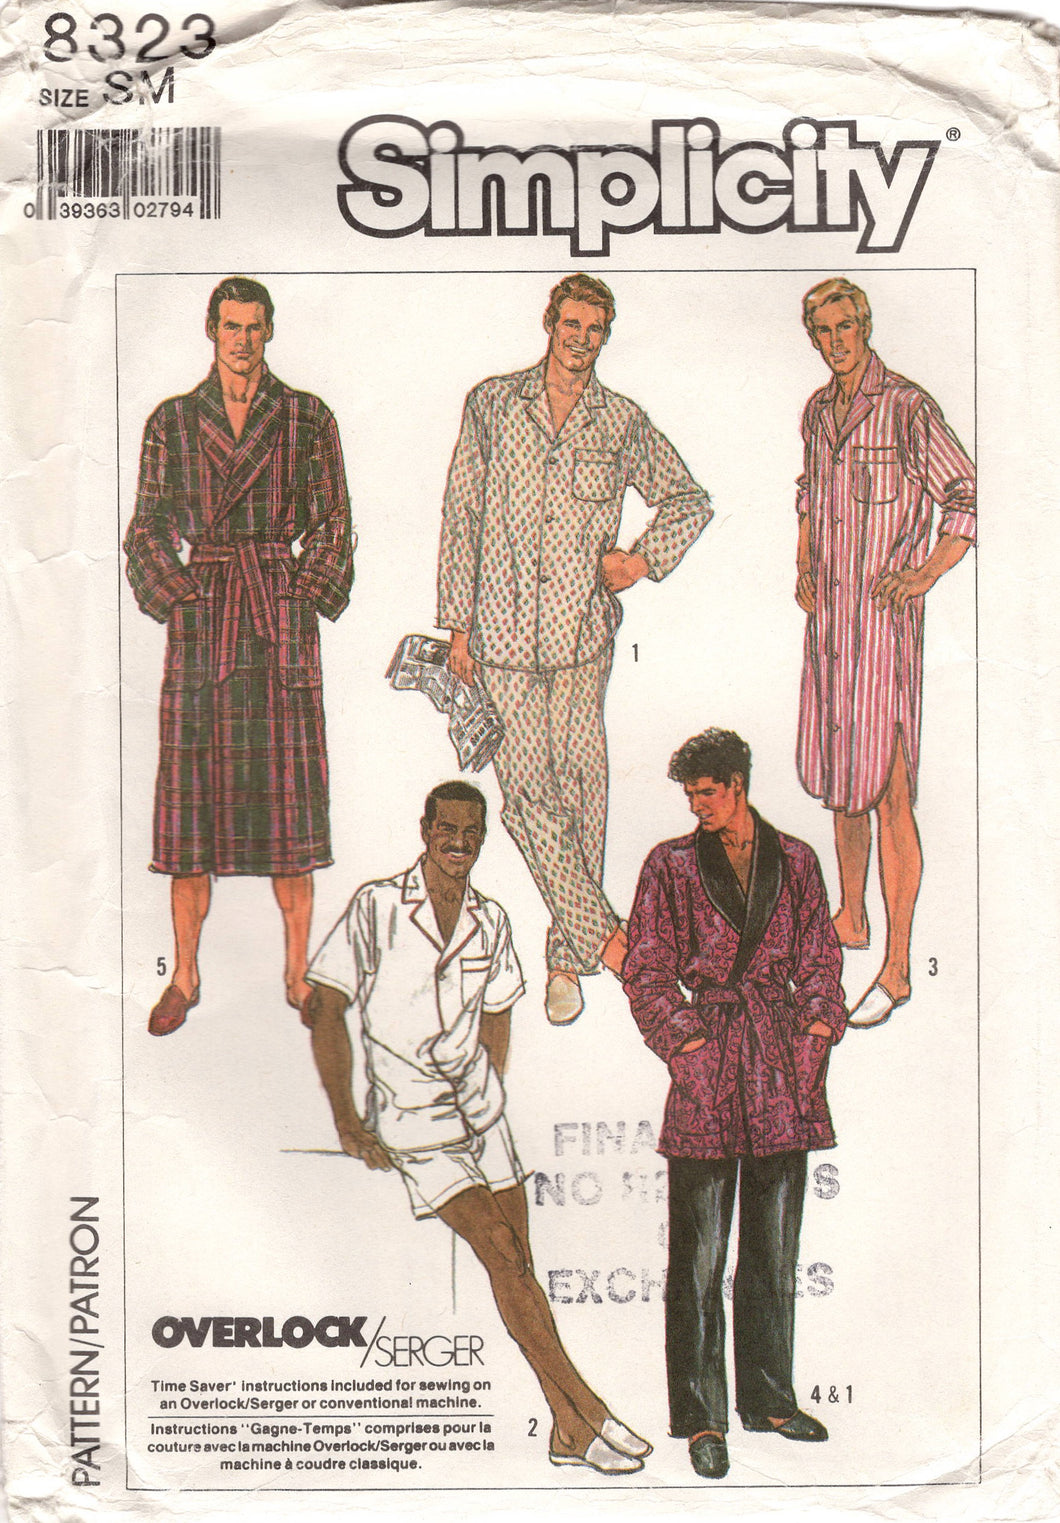 1980's Simplicity Men's Robe and Pajama Pattern - Chest 34-36